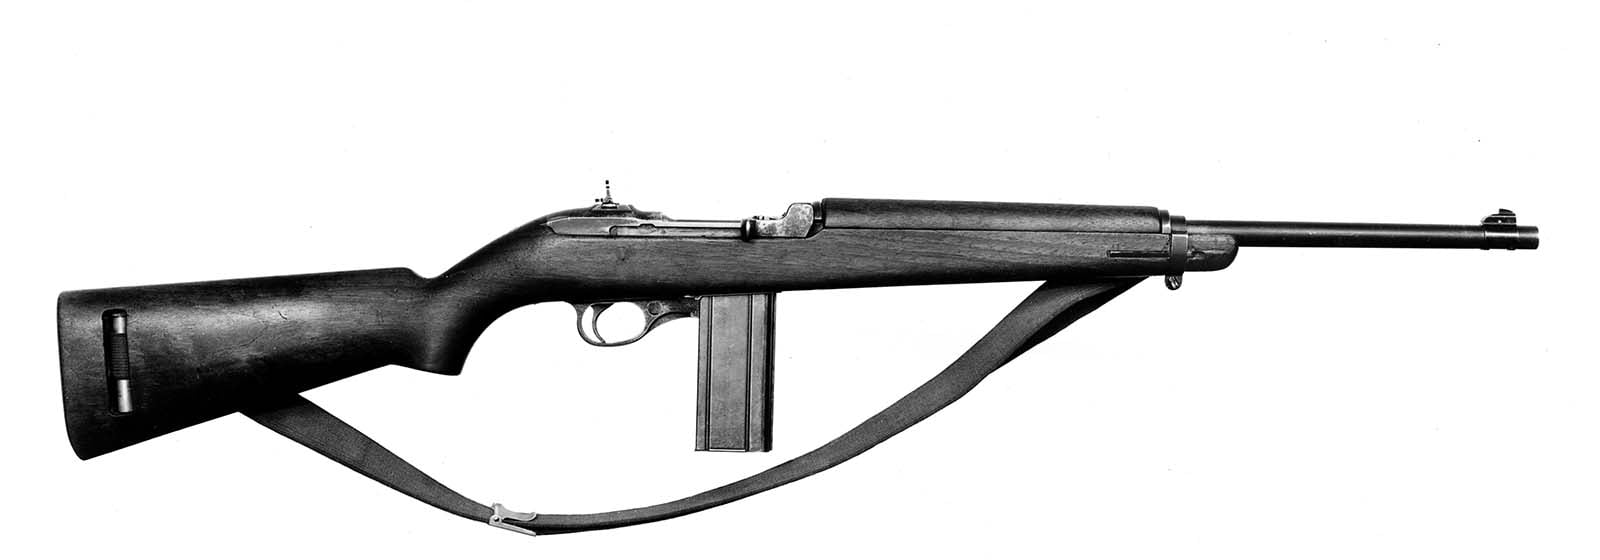 M1 Carbine manufactured at Winchester Repeating Arms Co. MS 20 Winchester Repeating Arms Company Archives Collection. P.20.0955